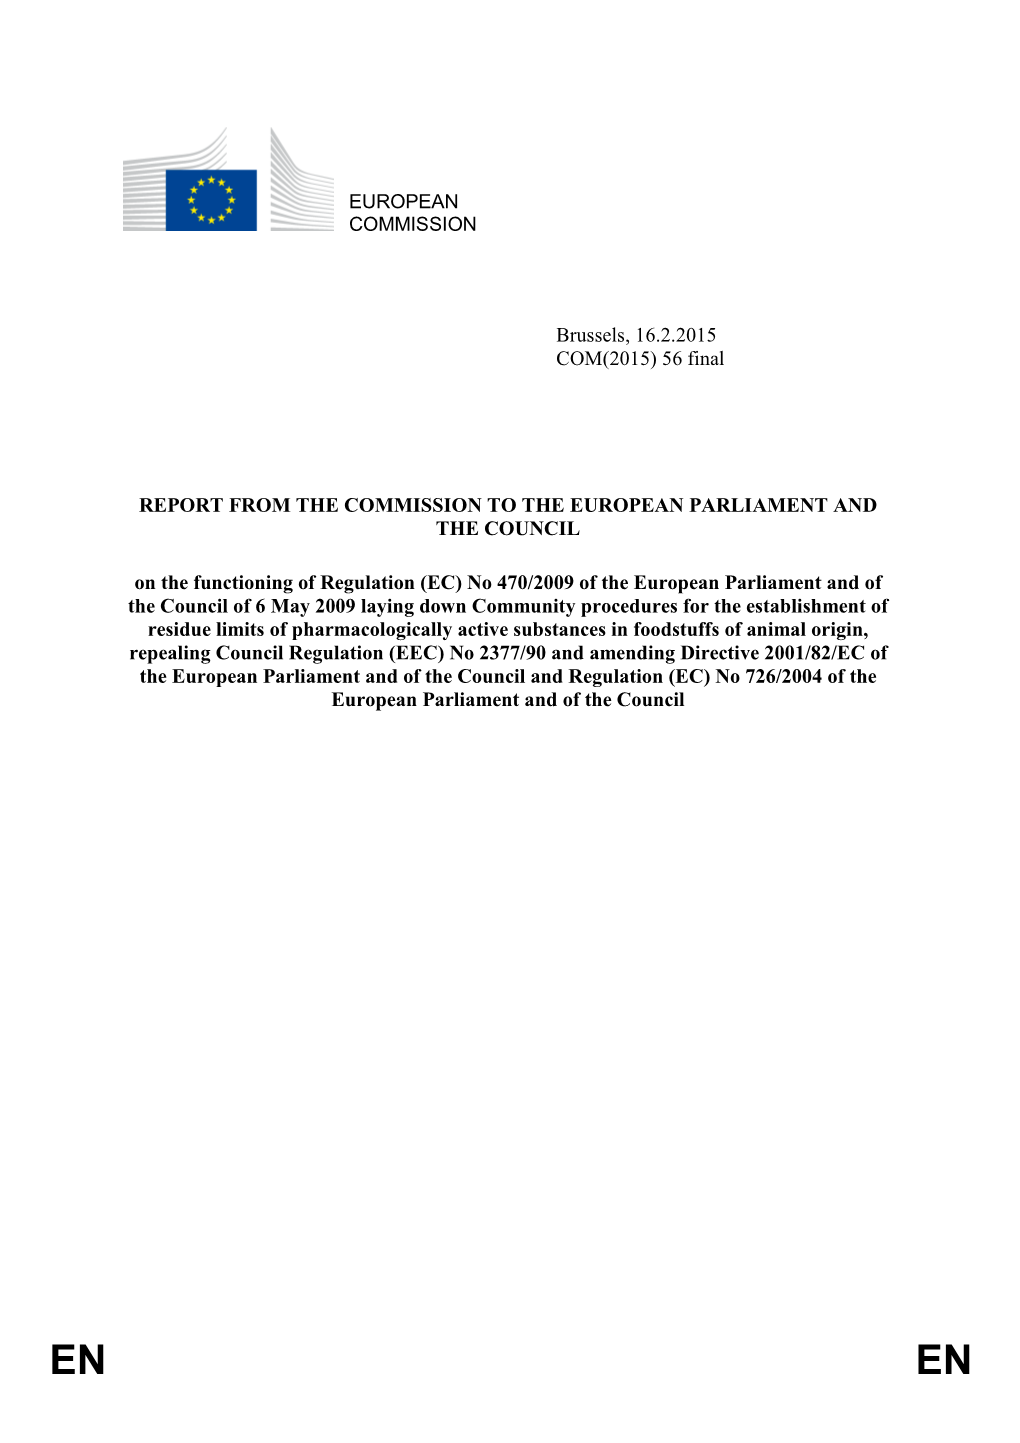 REPORT from the COMMISSION to the EUROPEAN PARLIAMENT and the COUNCIL on the Functioning